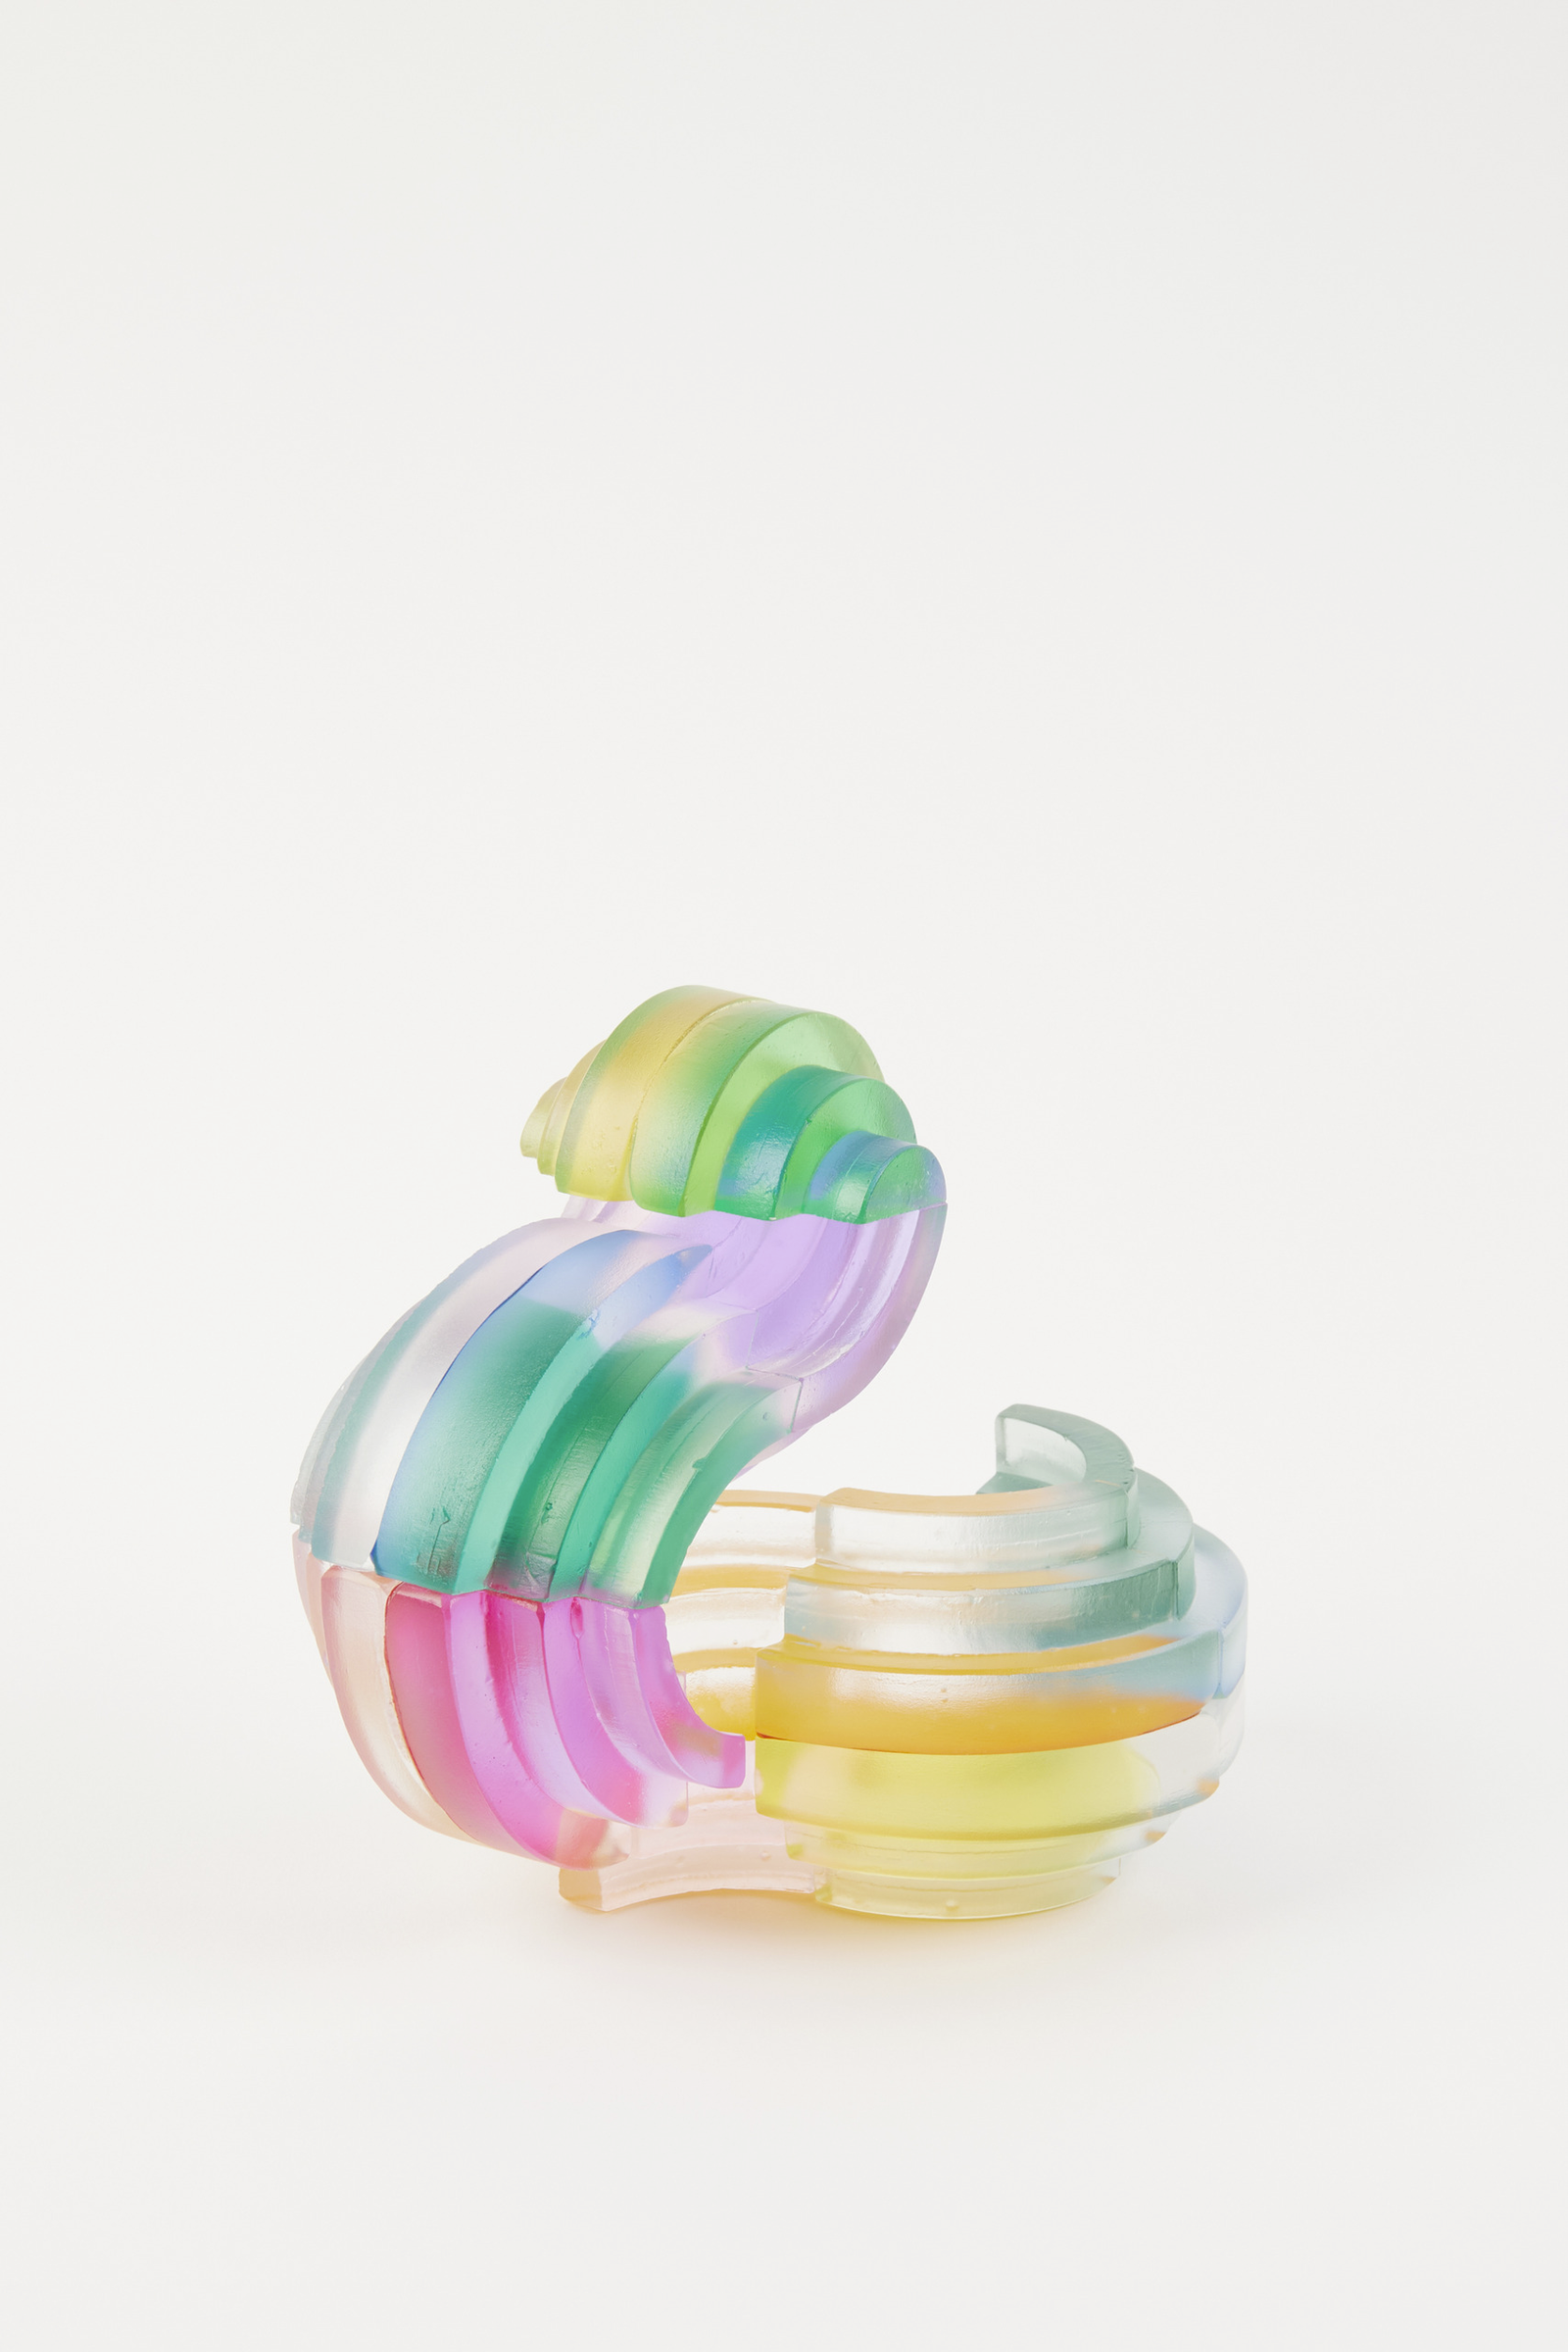 pulse is a cast glass sculpture made of multiple joined vibrant coloured segments that twist